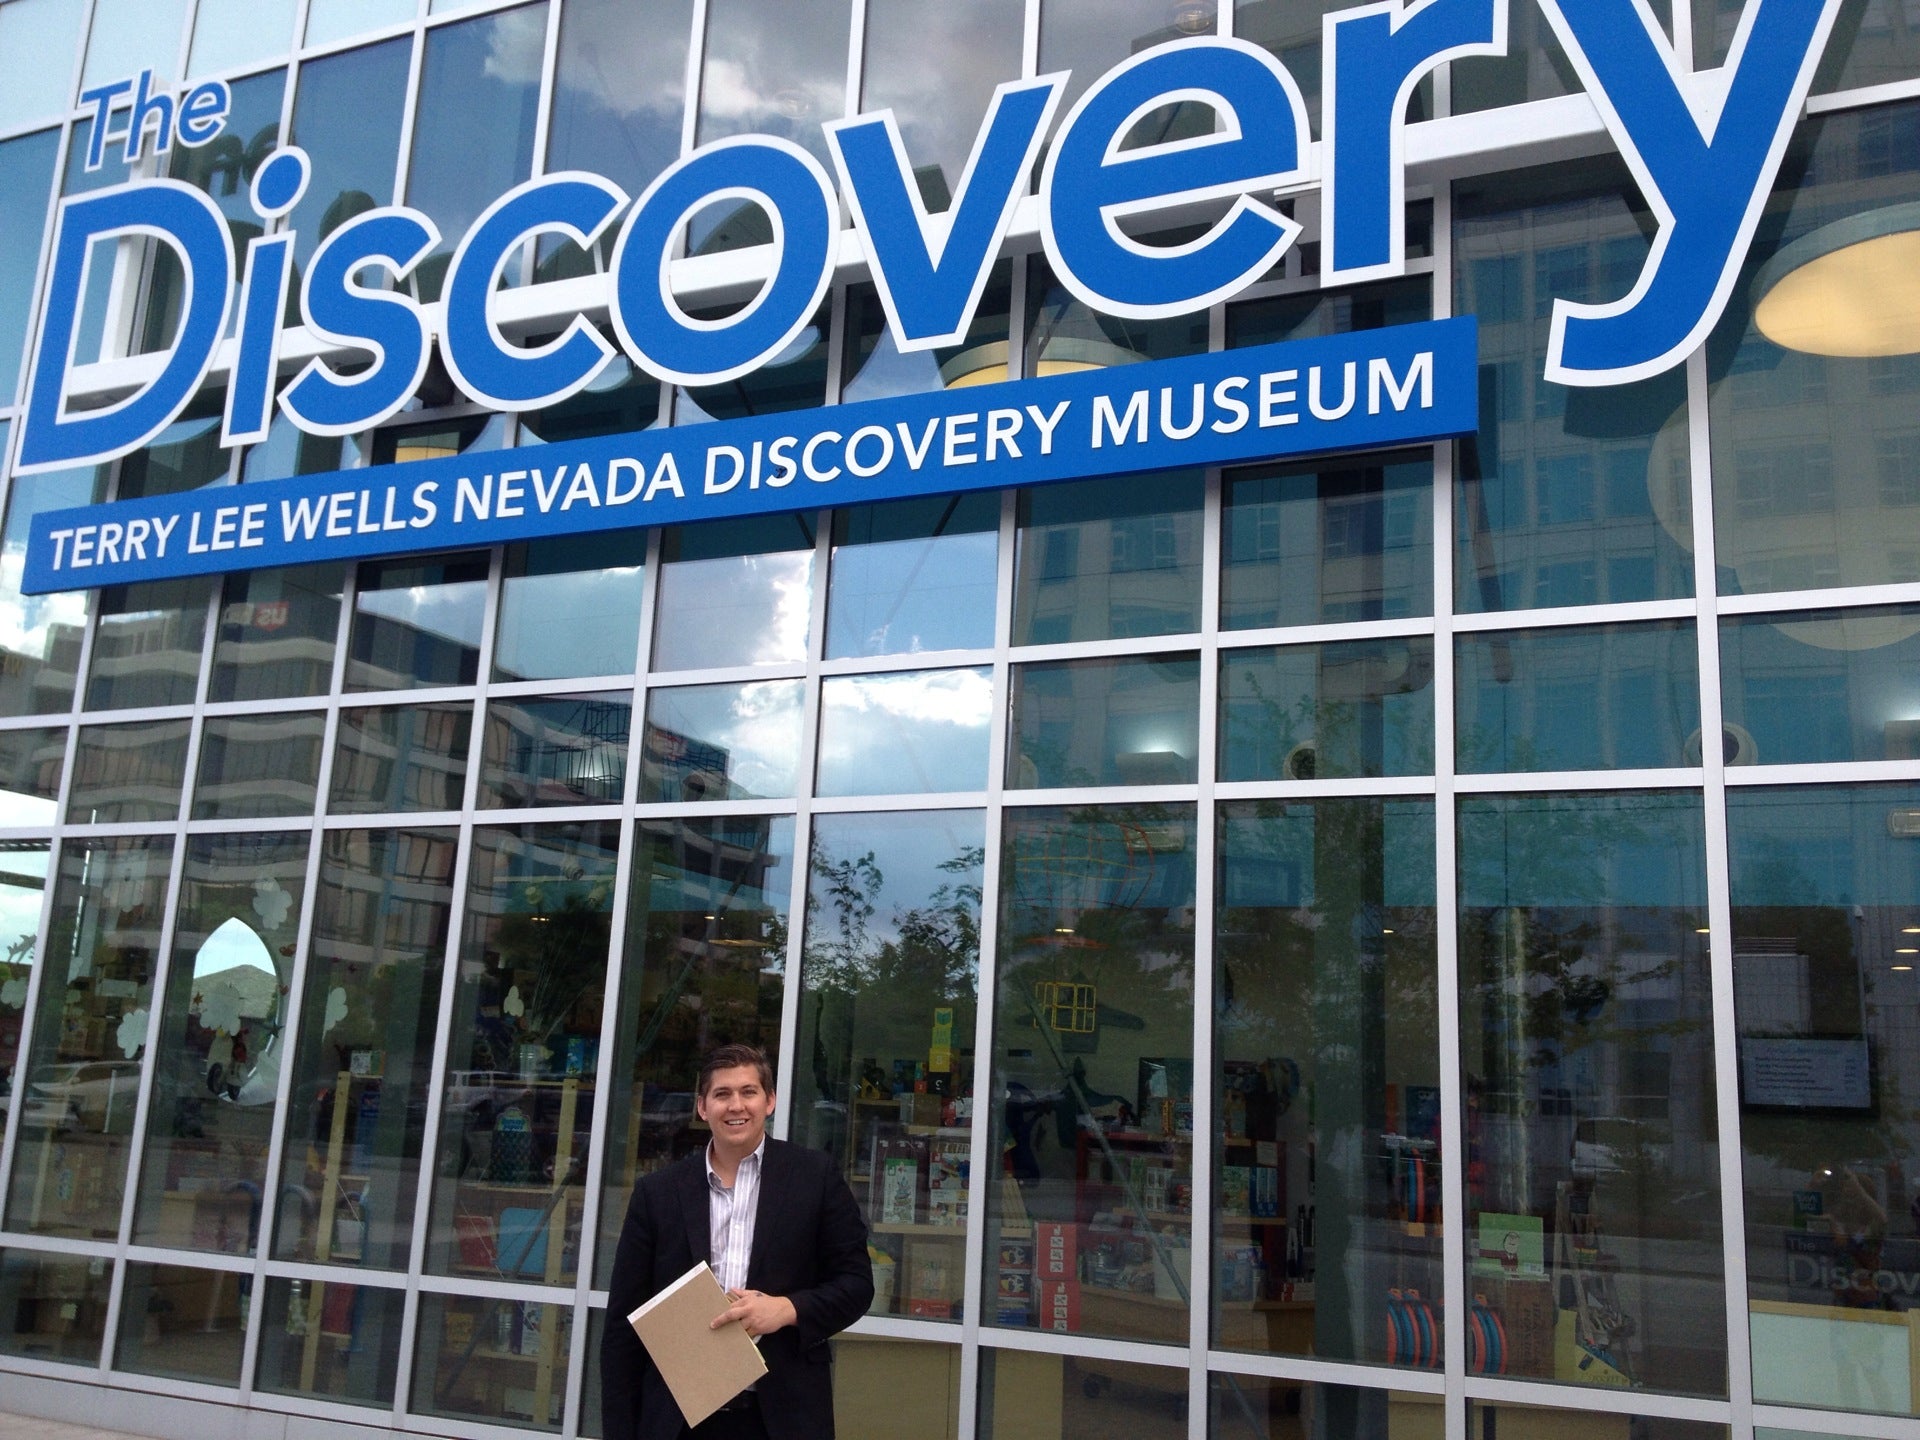 Terry Lee Wells Nevada Discovery Museum, 490 S Center St, Reno, NV, Museums  - MapQuest